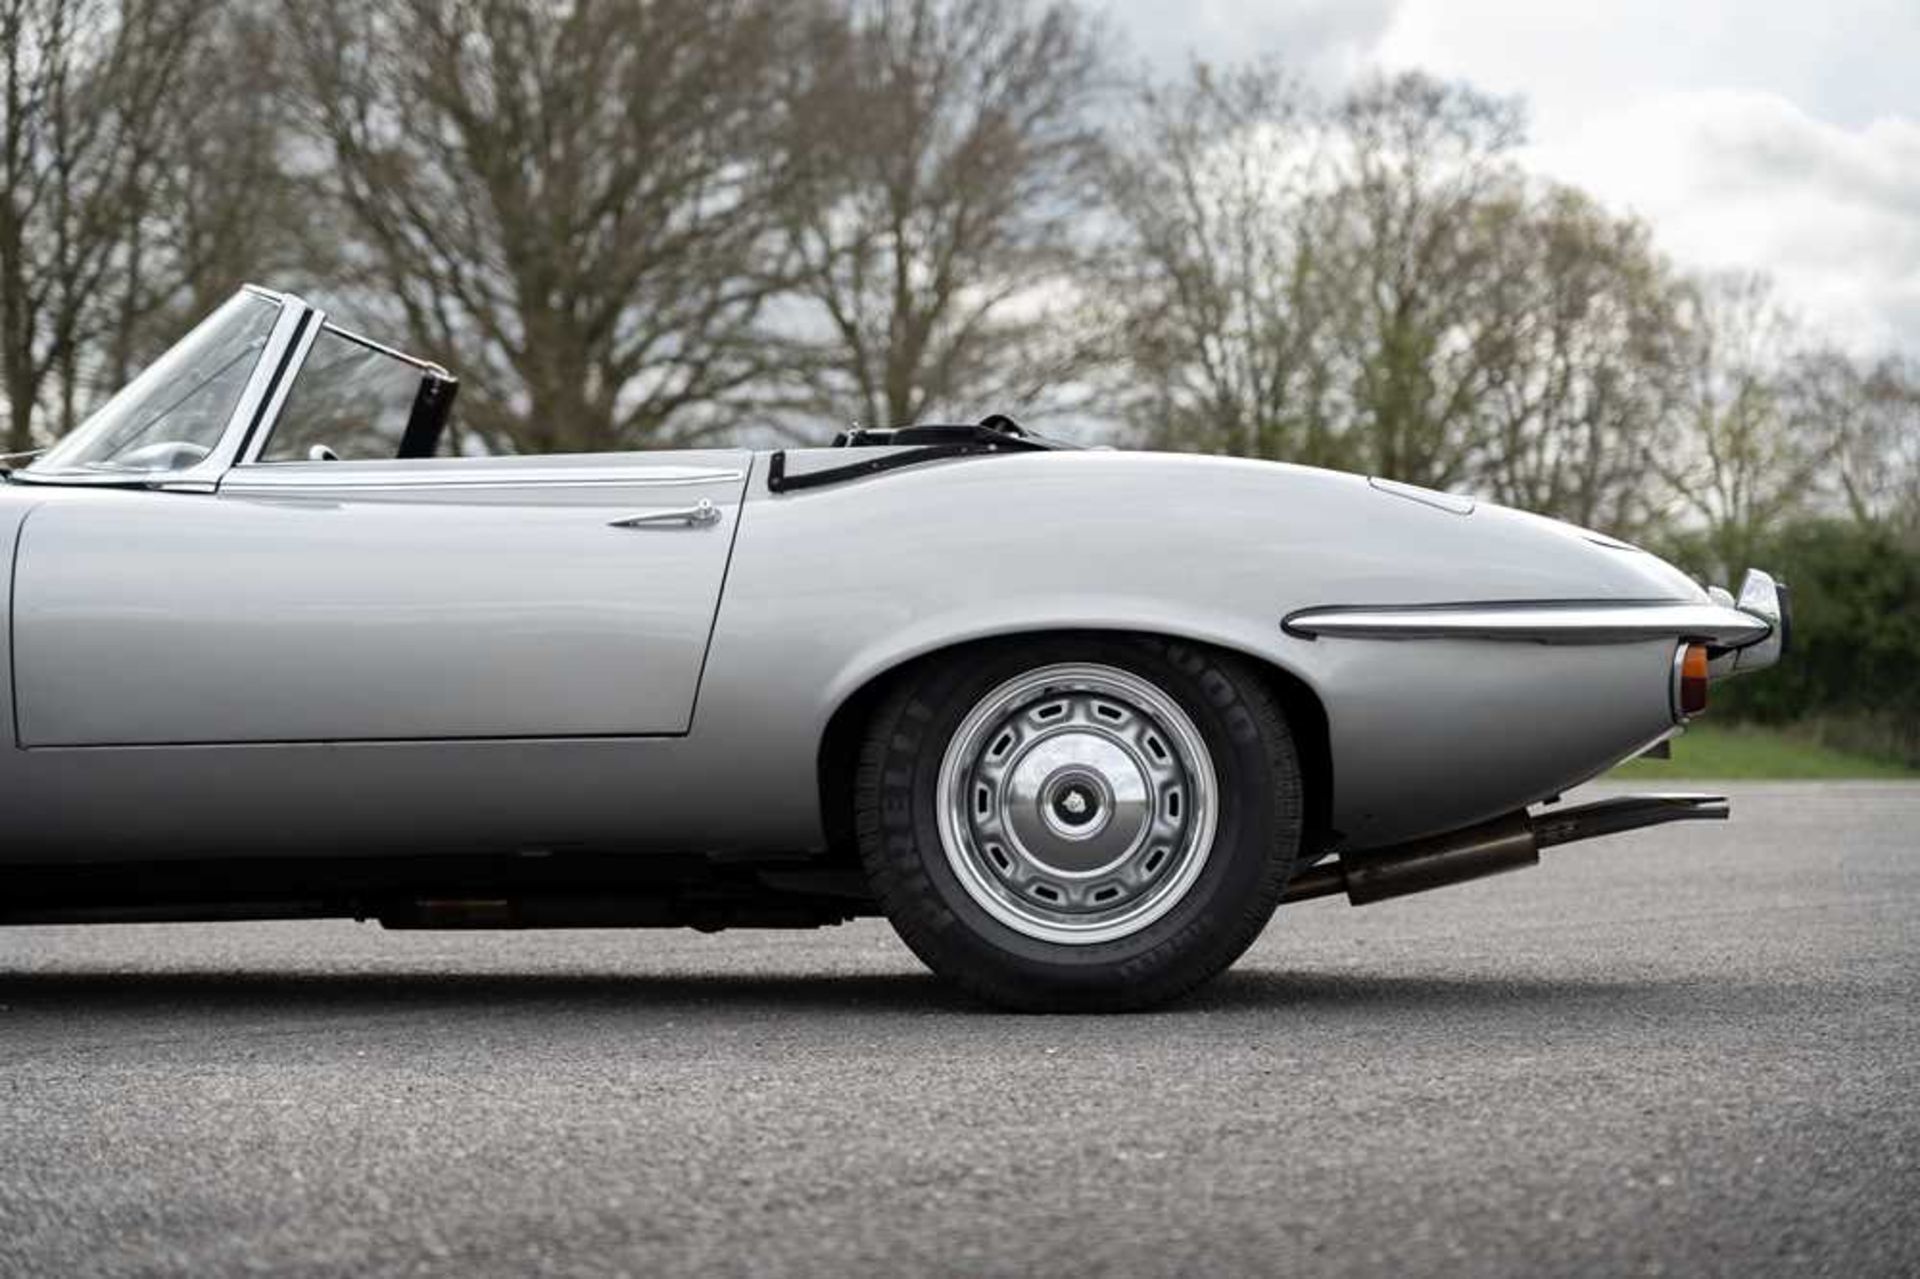 1974 Jaguar E-Type Series III V12 Roadster Only one family owner and 54,412 miles from new - Image 53 of 89